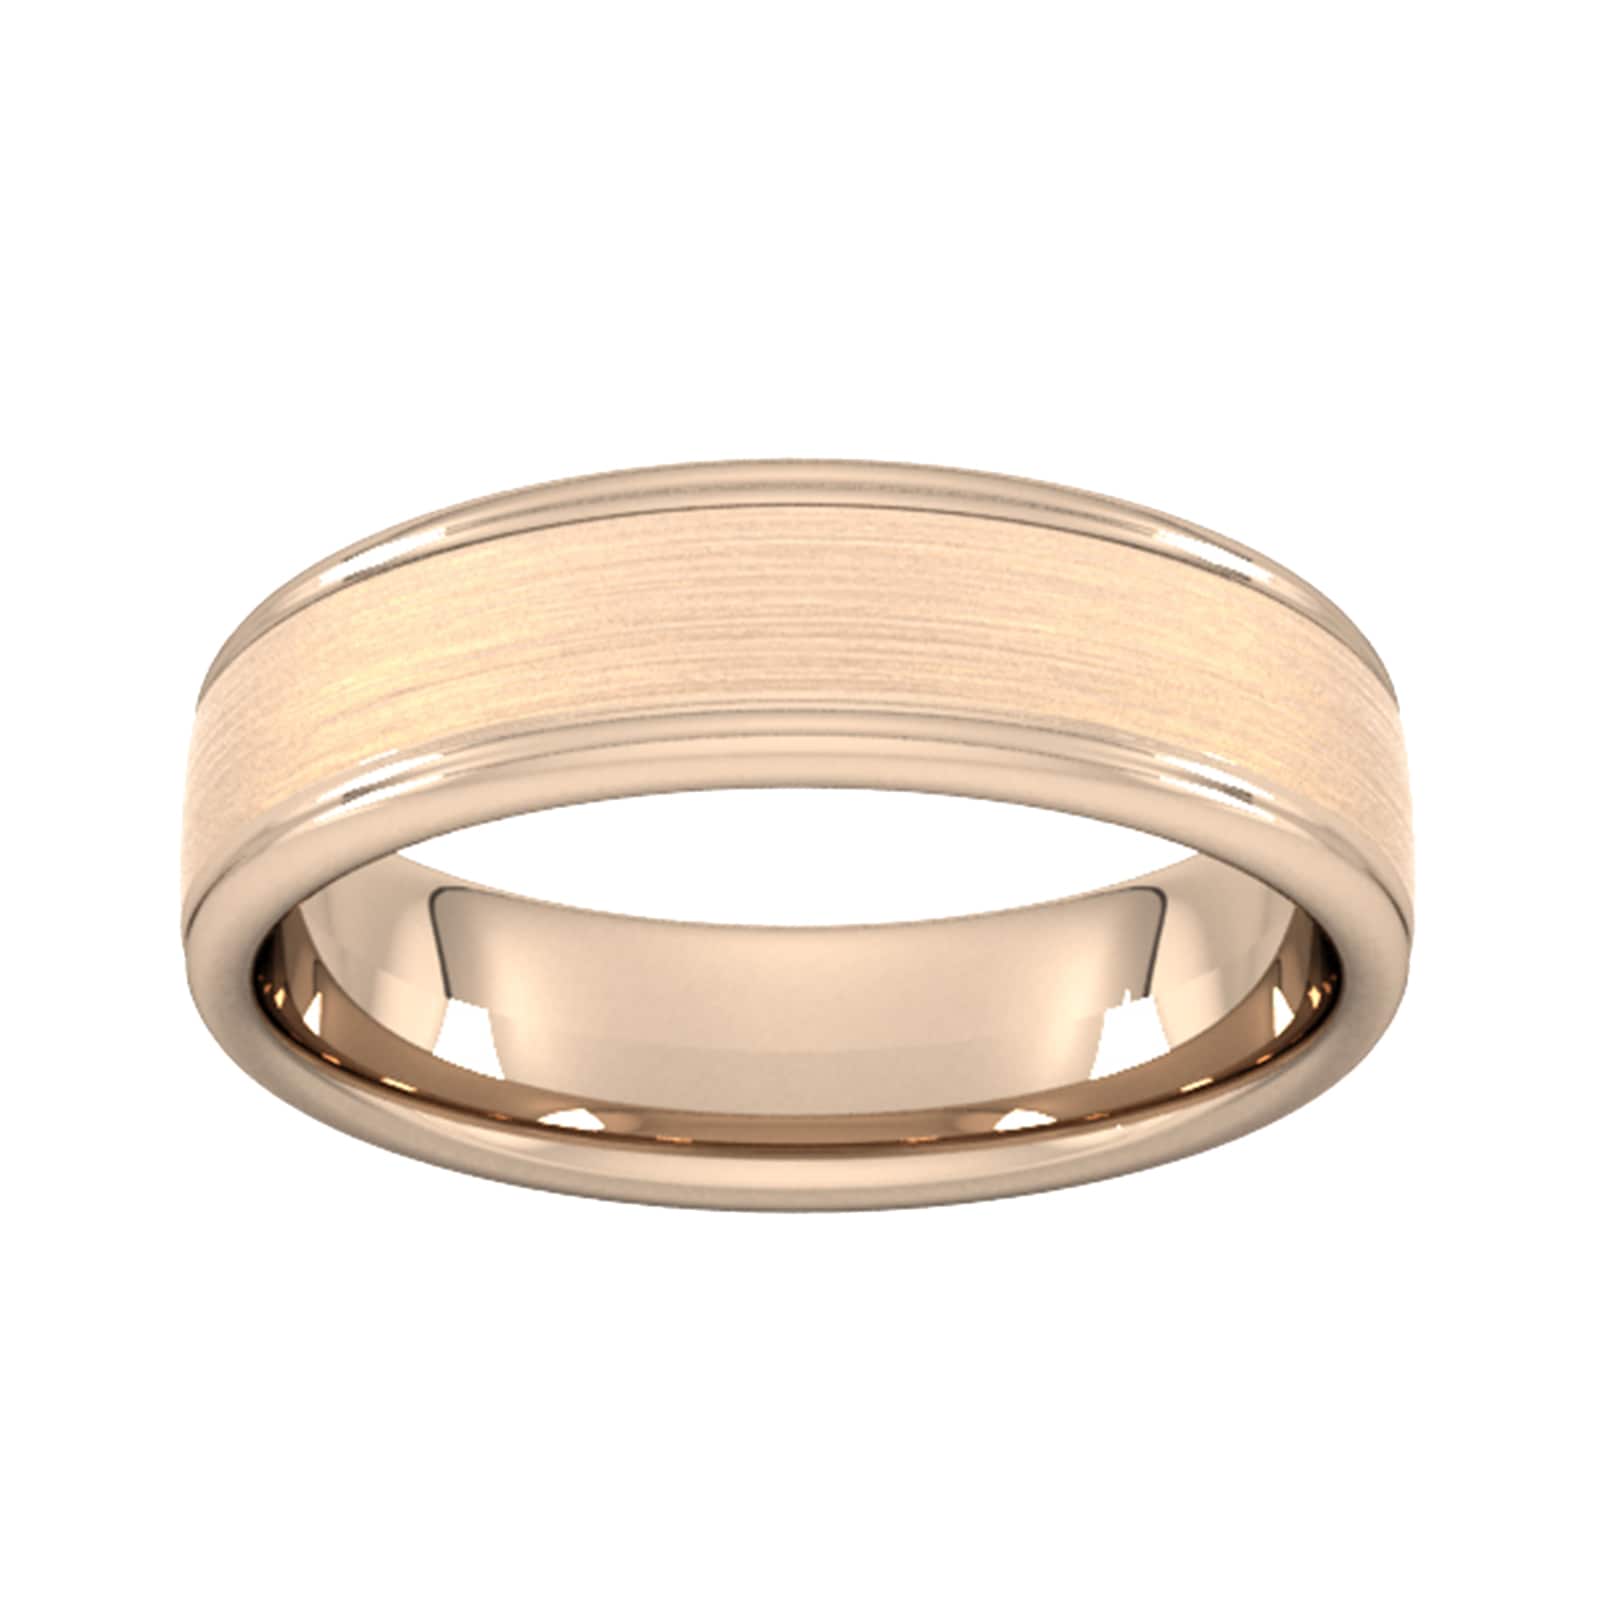 6mm D Shape Heavy Matt Centre With Grooves Wedding Ring In 9 Carat Rose Gold - Ring Size P